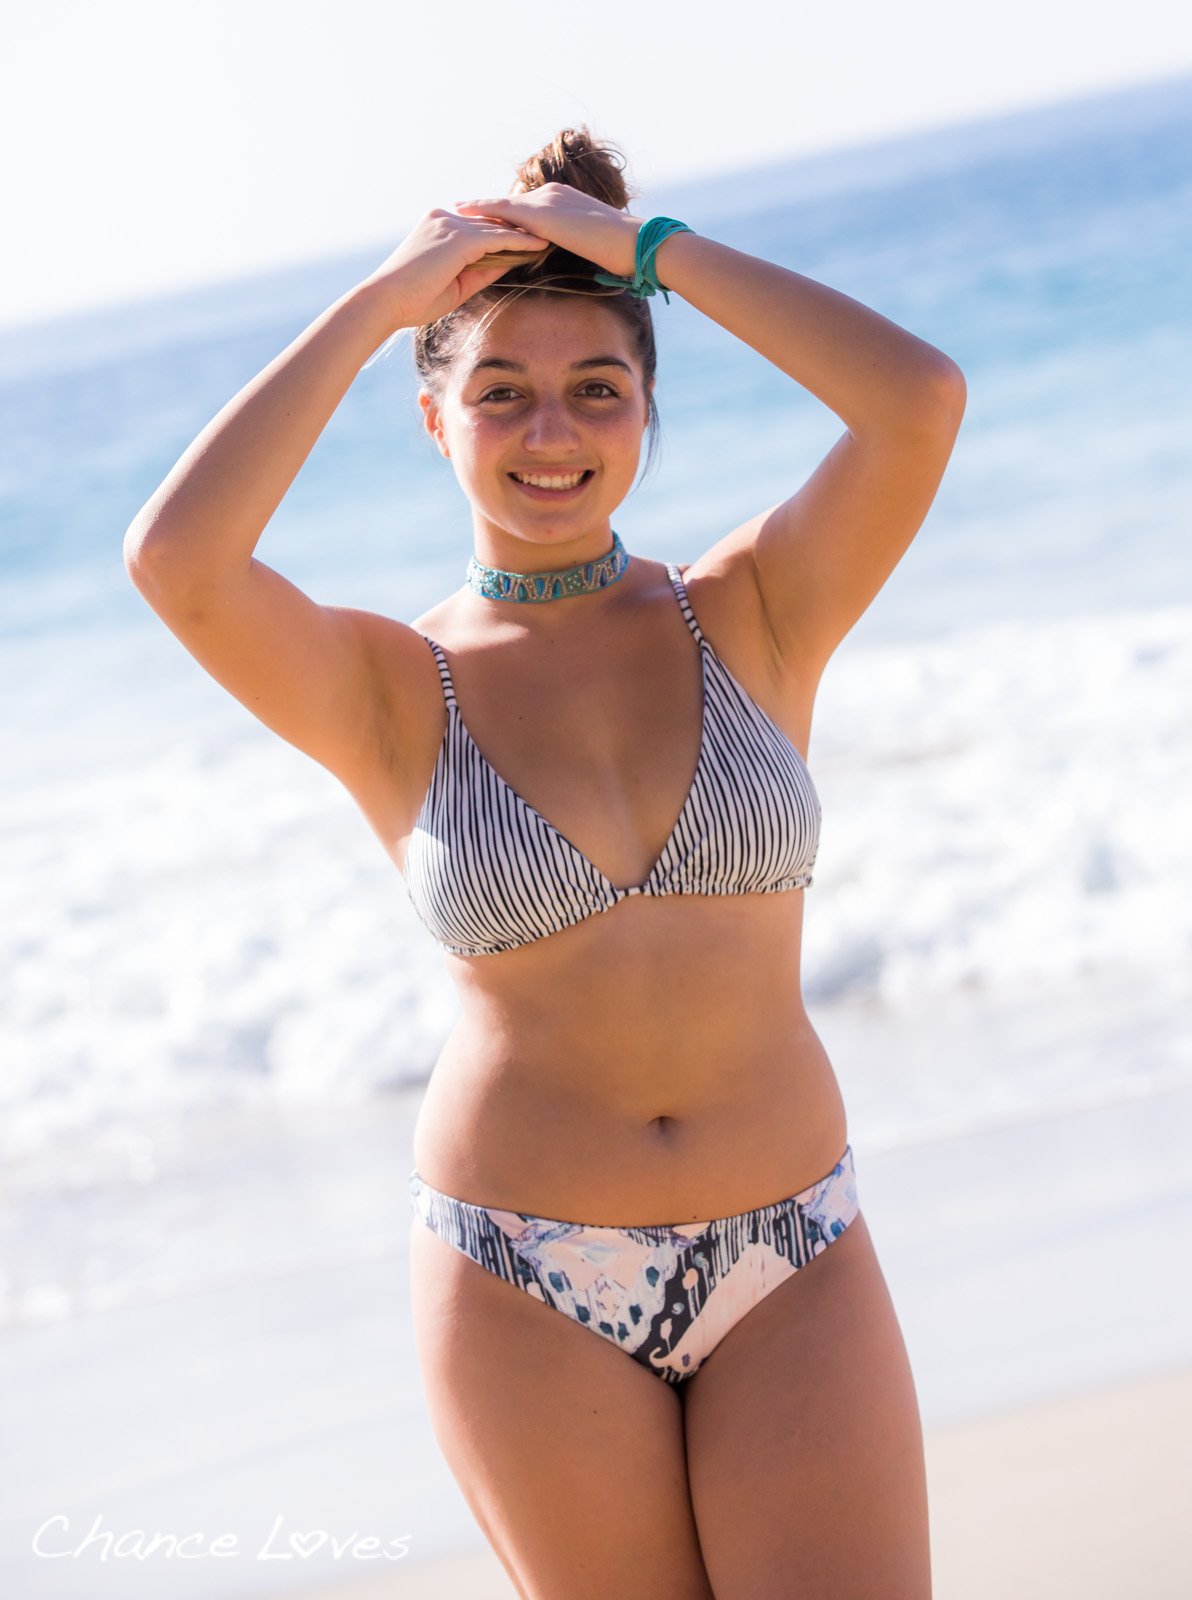 Young Woman on the beach, laughing and adjusting her pony tail at the same time, looking amazing in her reversible bikini.